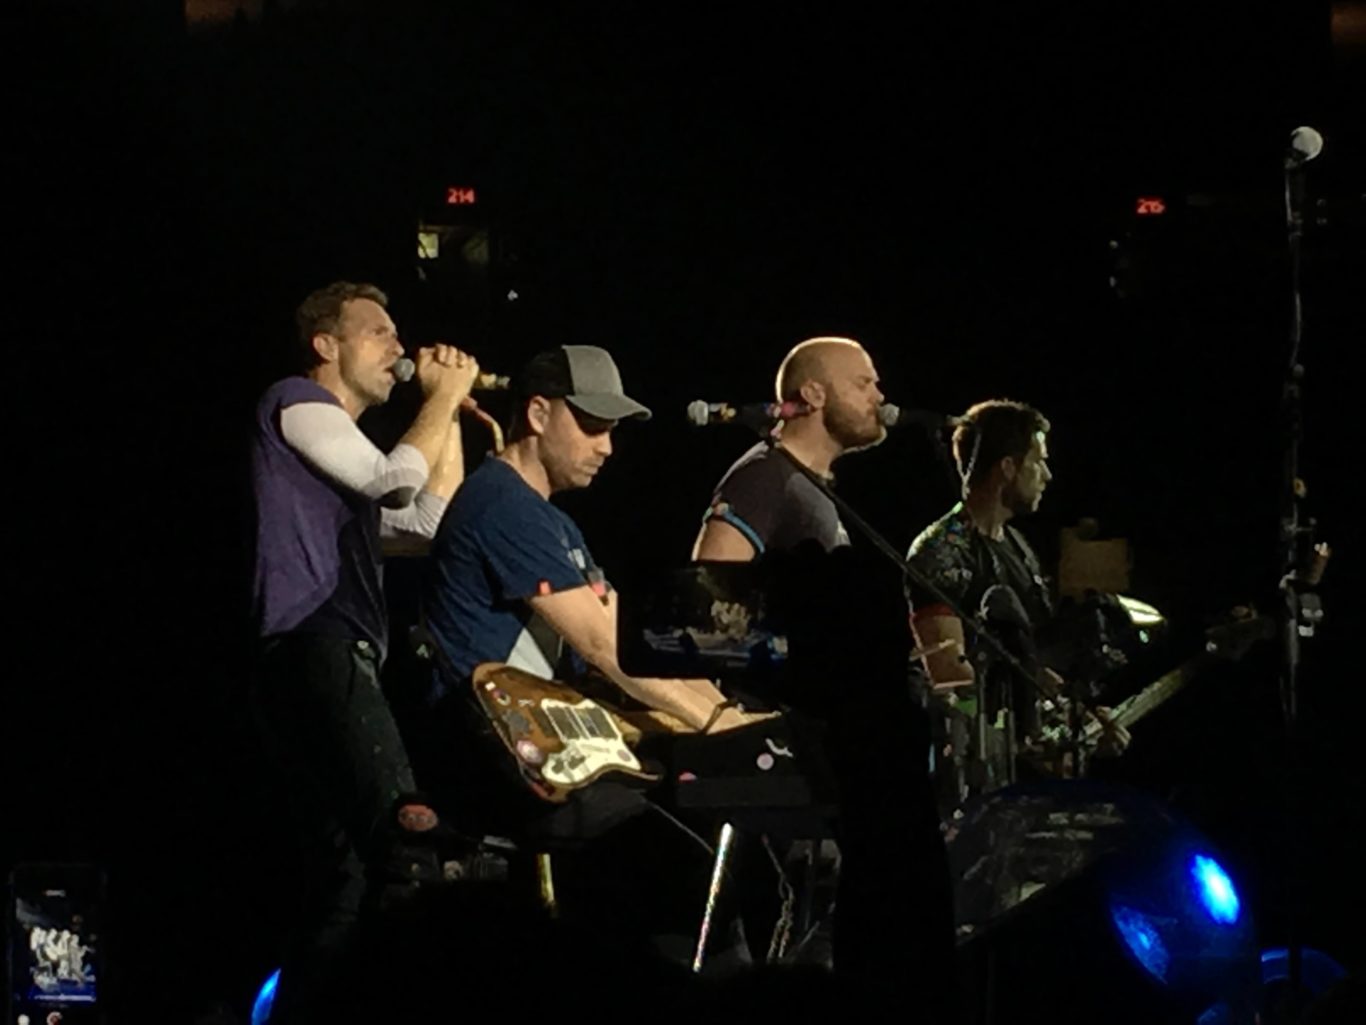 Coldplay performing live